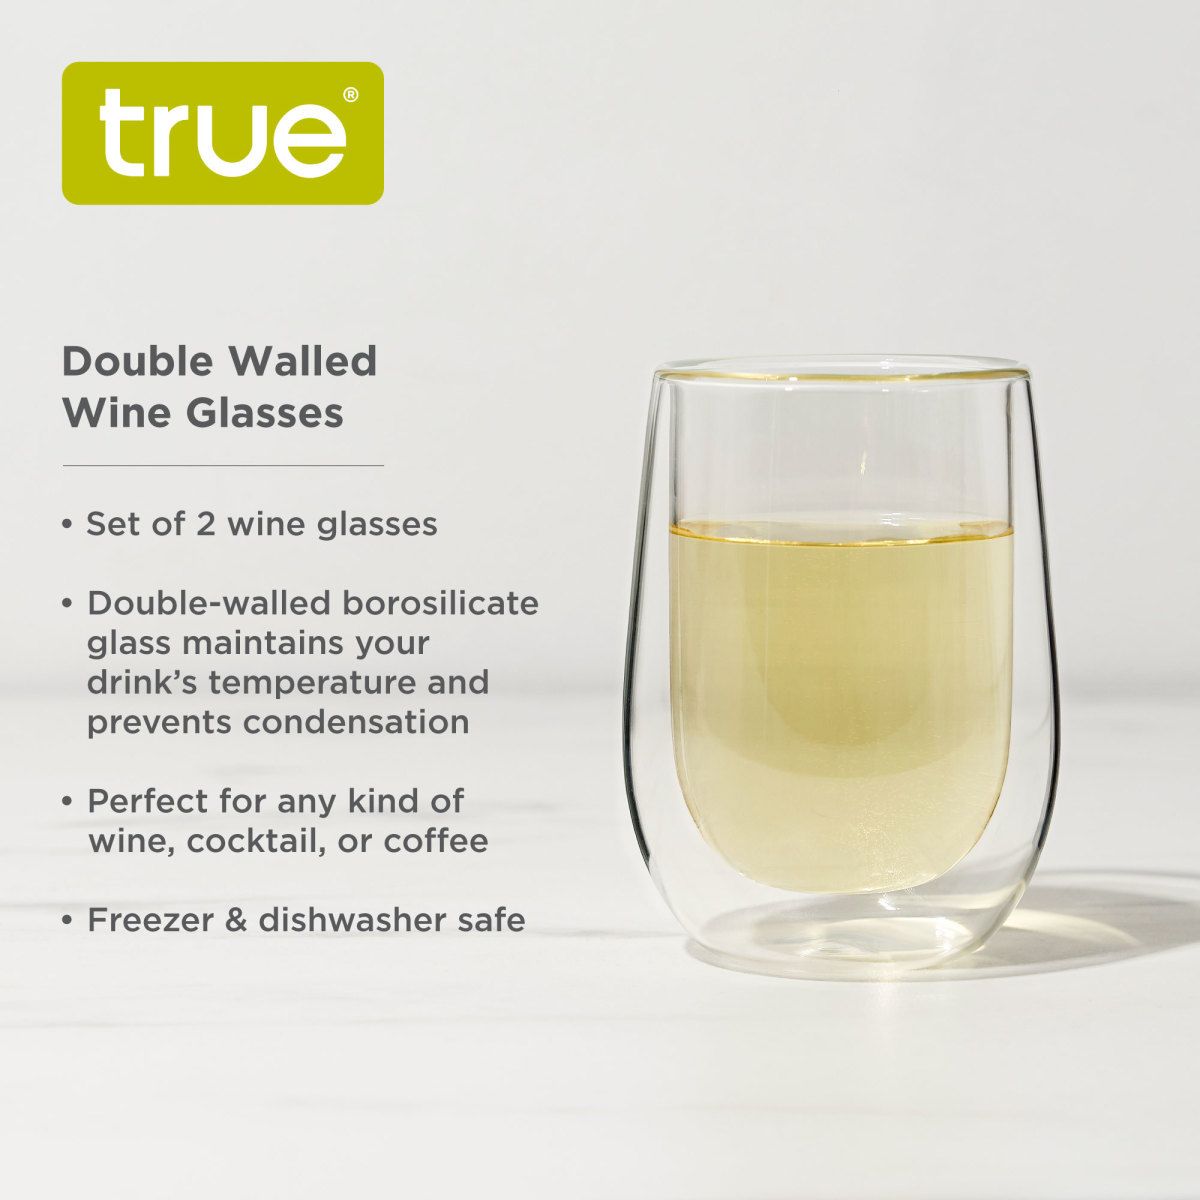 True Insulated Wine Glasses - Double Walled Stemless Wine Glass